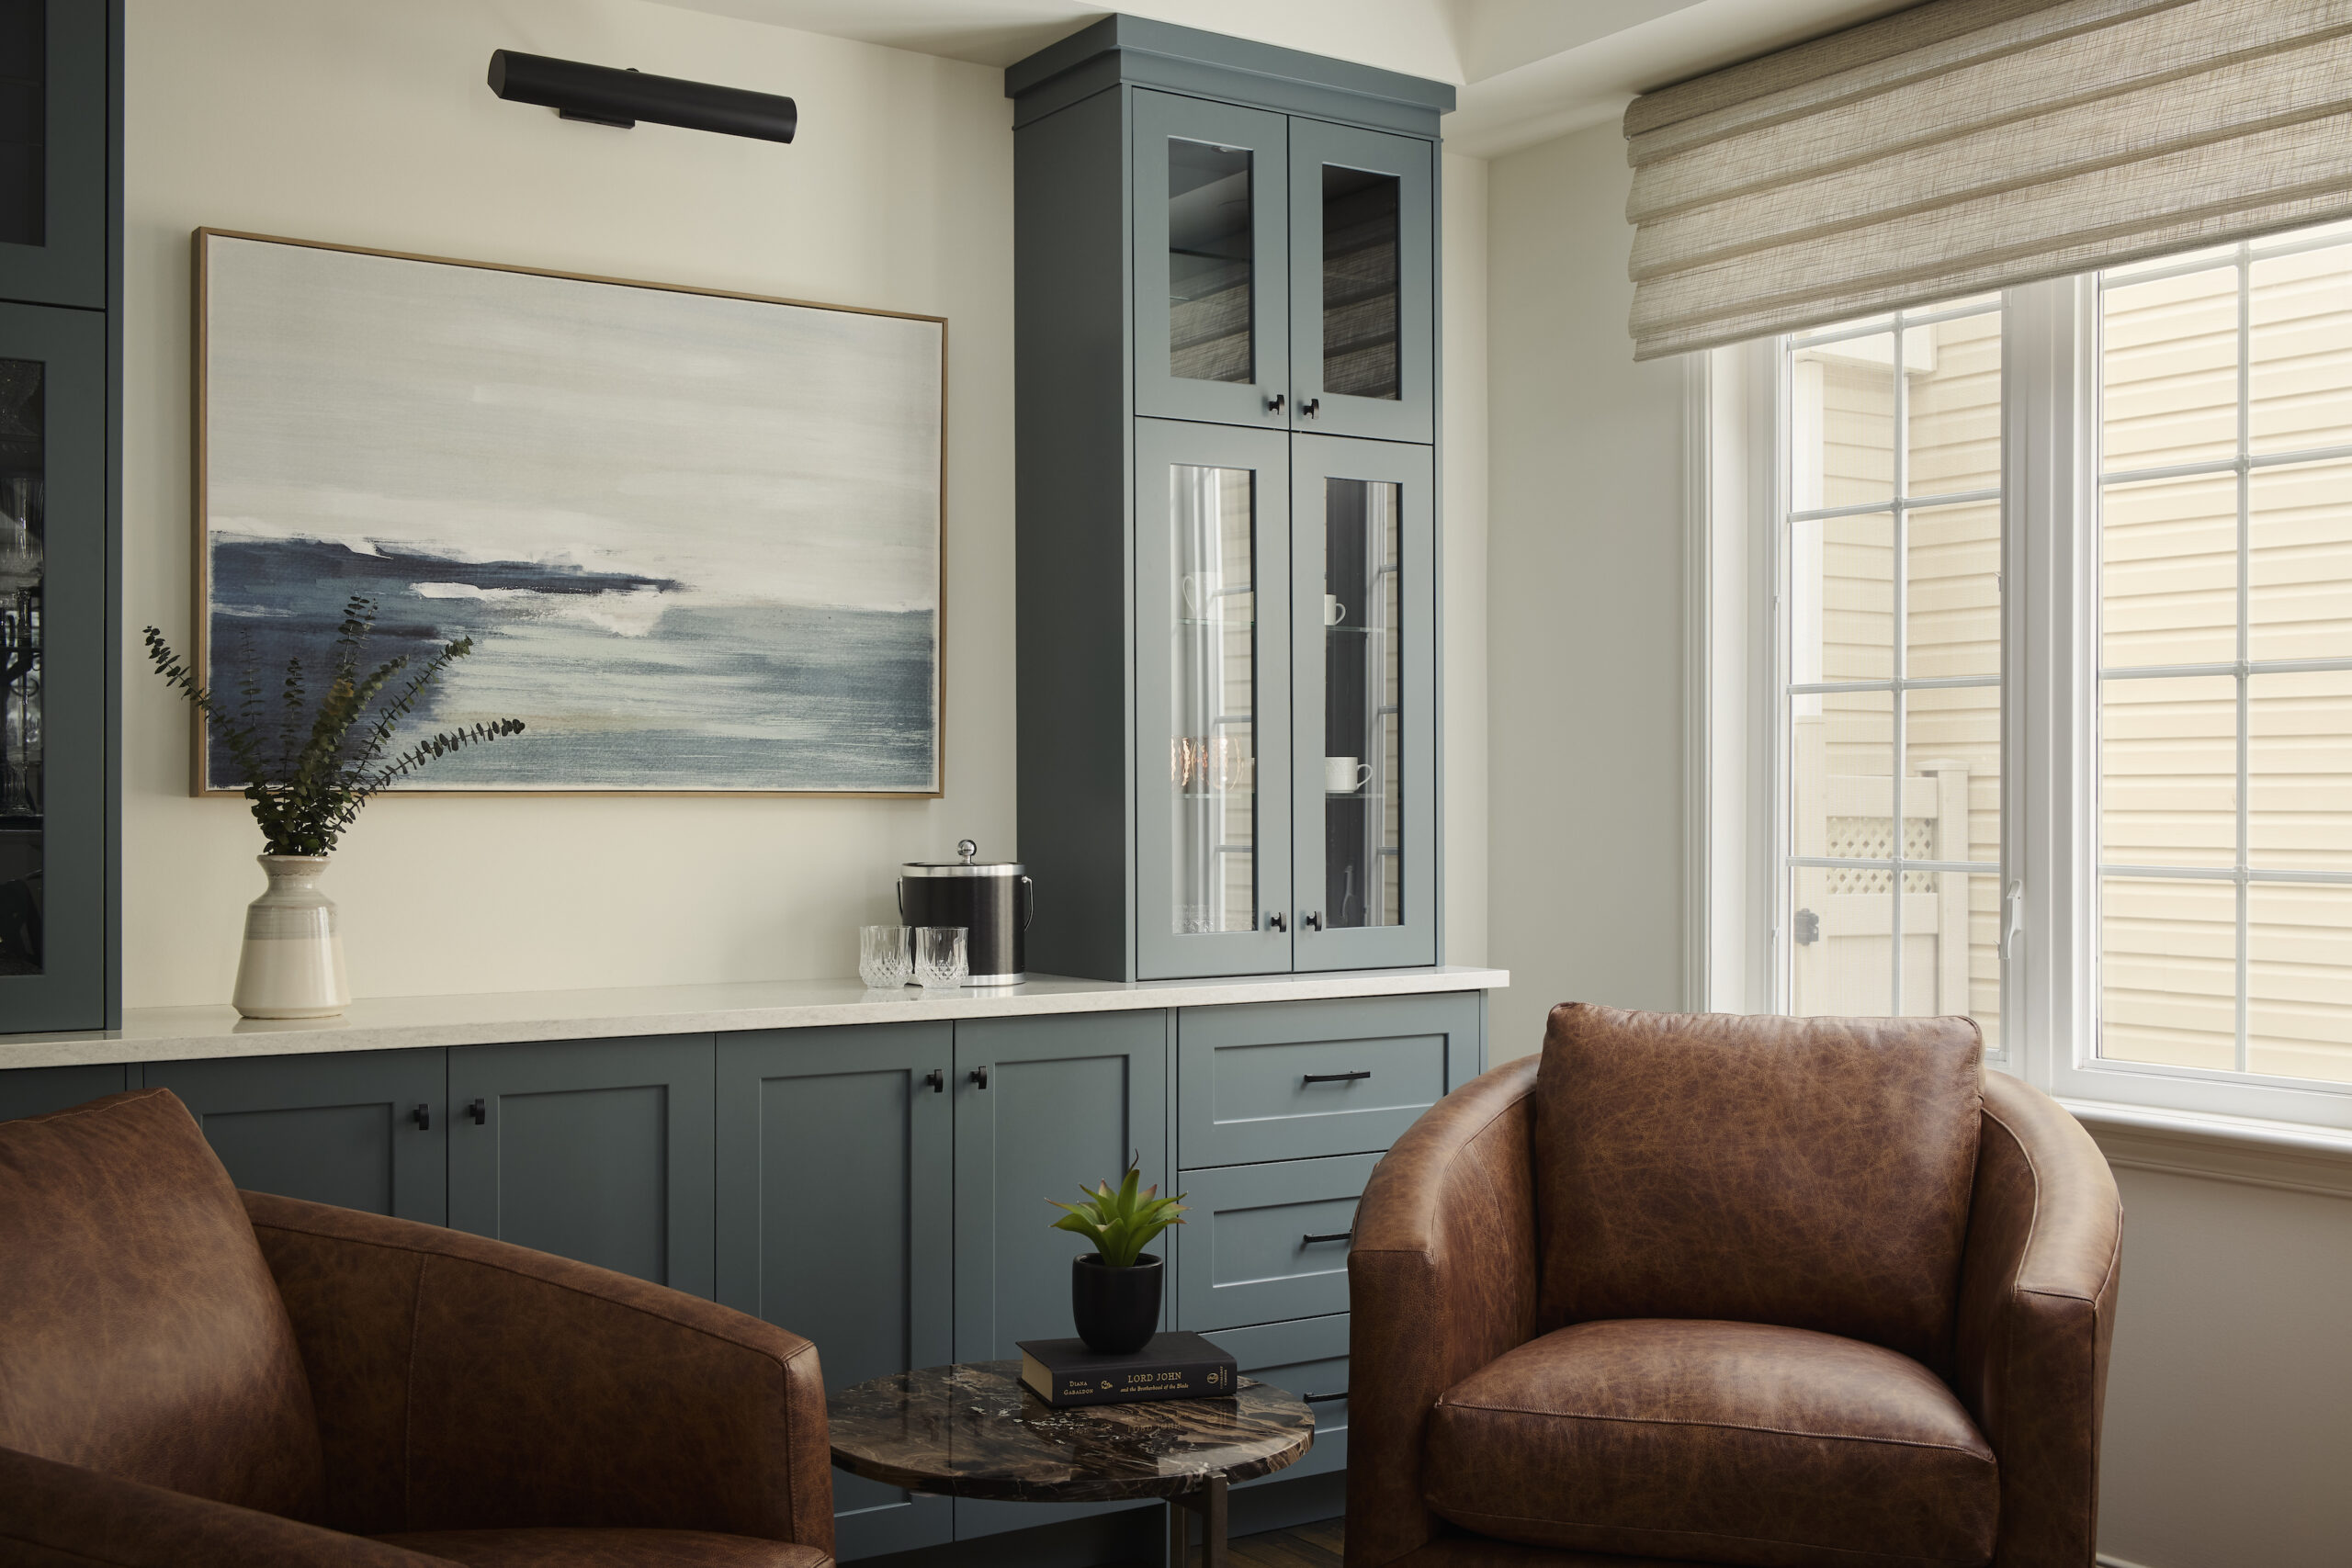 Beautiful custom blue cabinets serve as a bar area in this clients dining room. There are two tall cabinets surrounding a stunning painting.